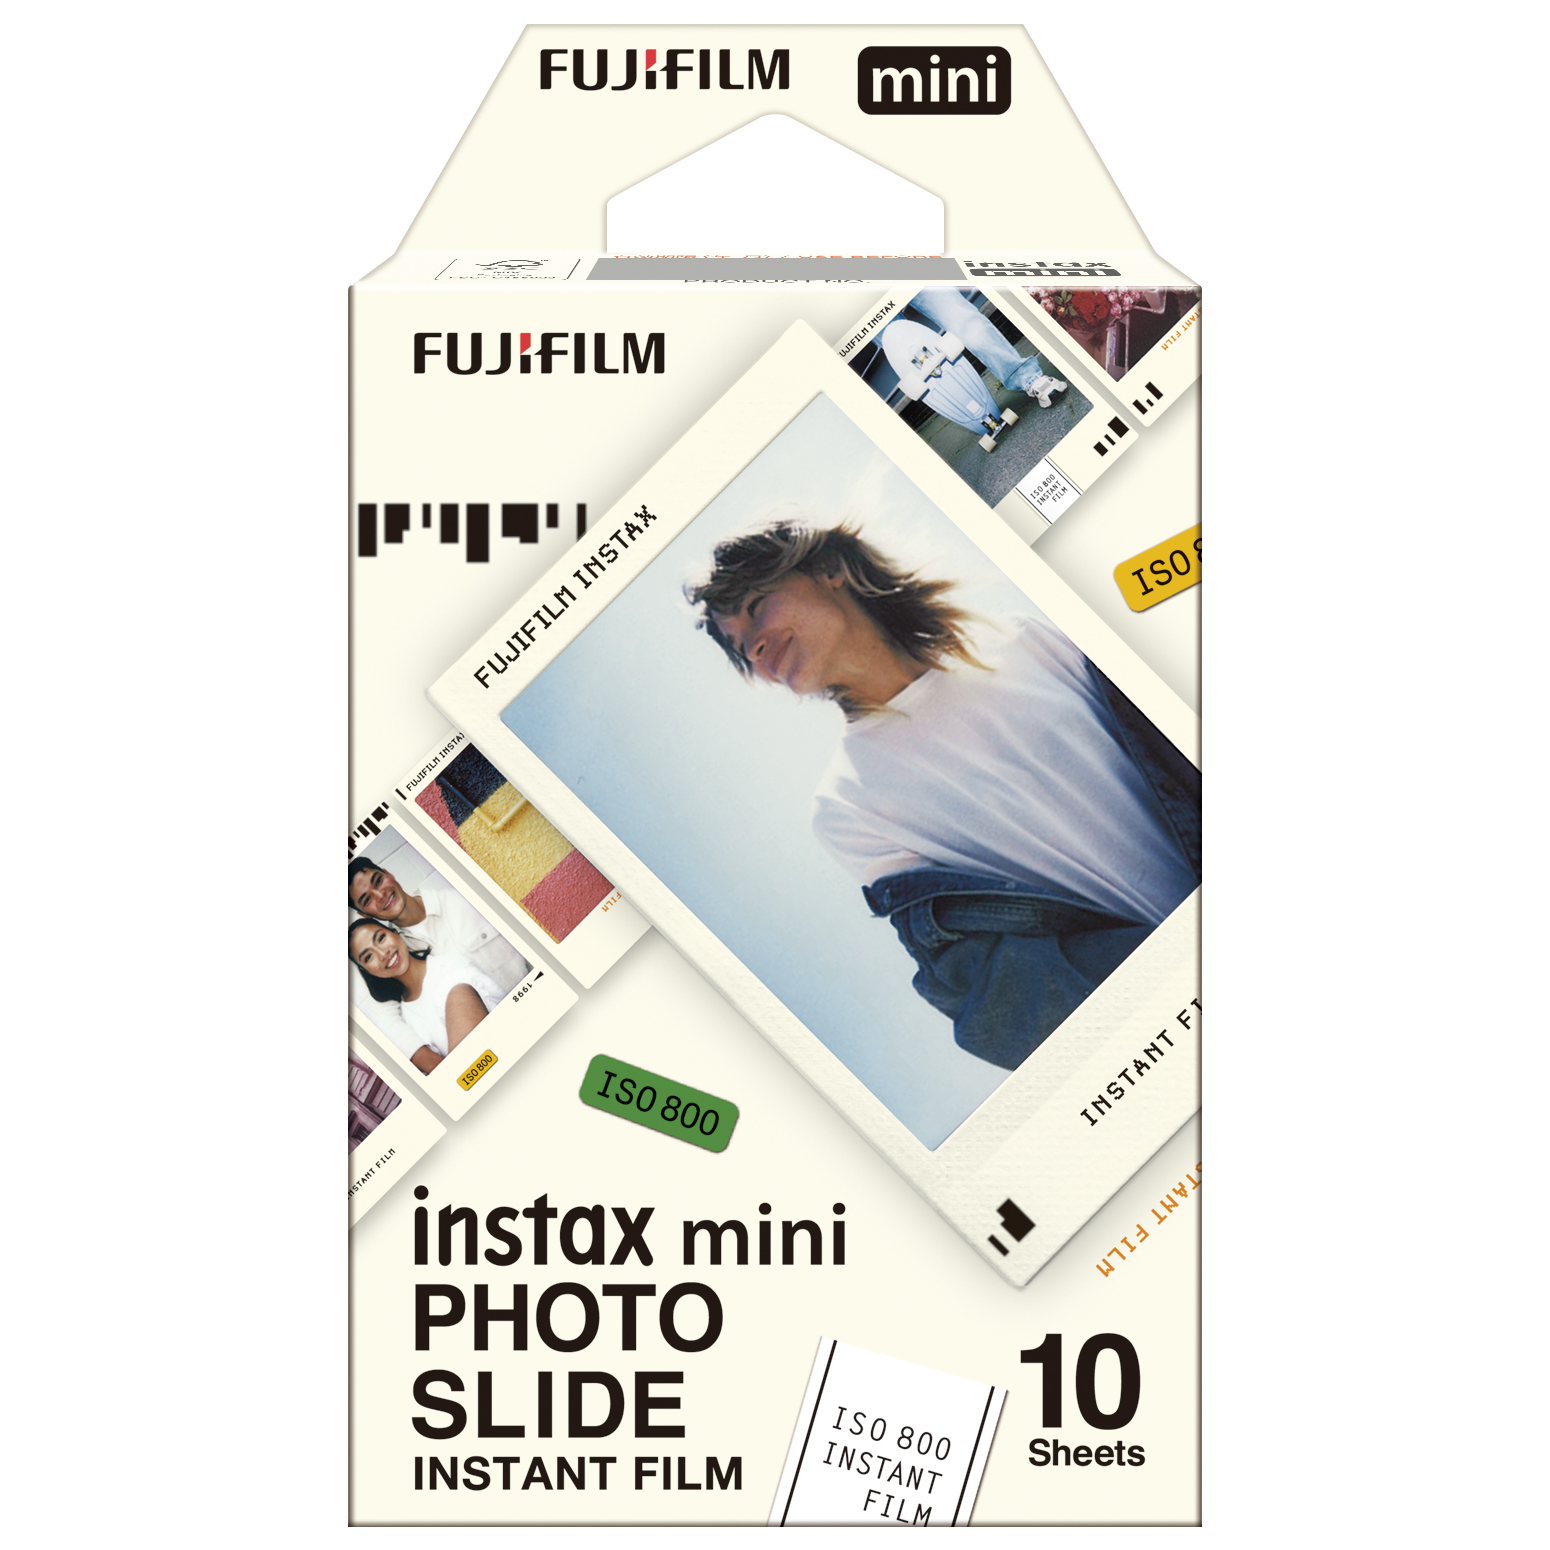 Photos - Other for Computer Fujifilm Instax Mini Instant Photo Film - Photo Slide, 10 Shot Pack 168277 